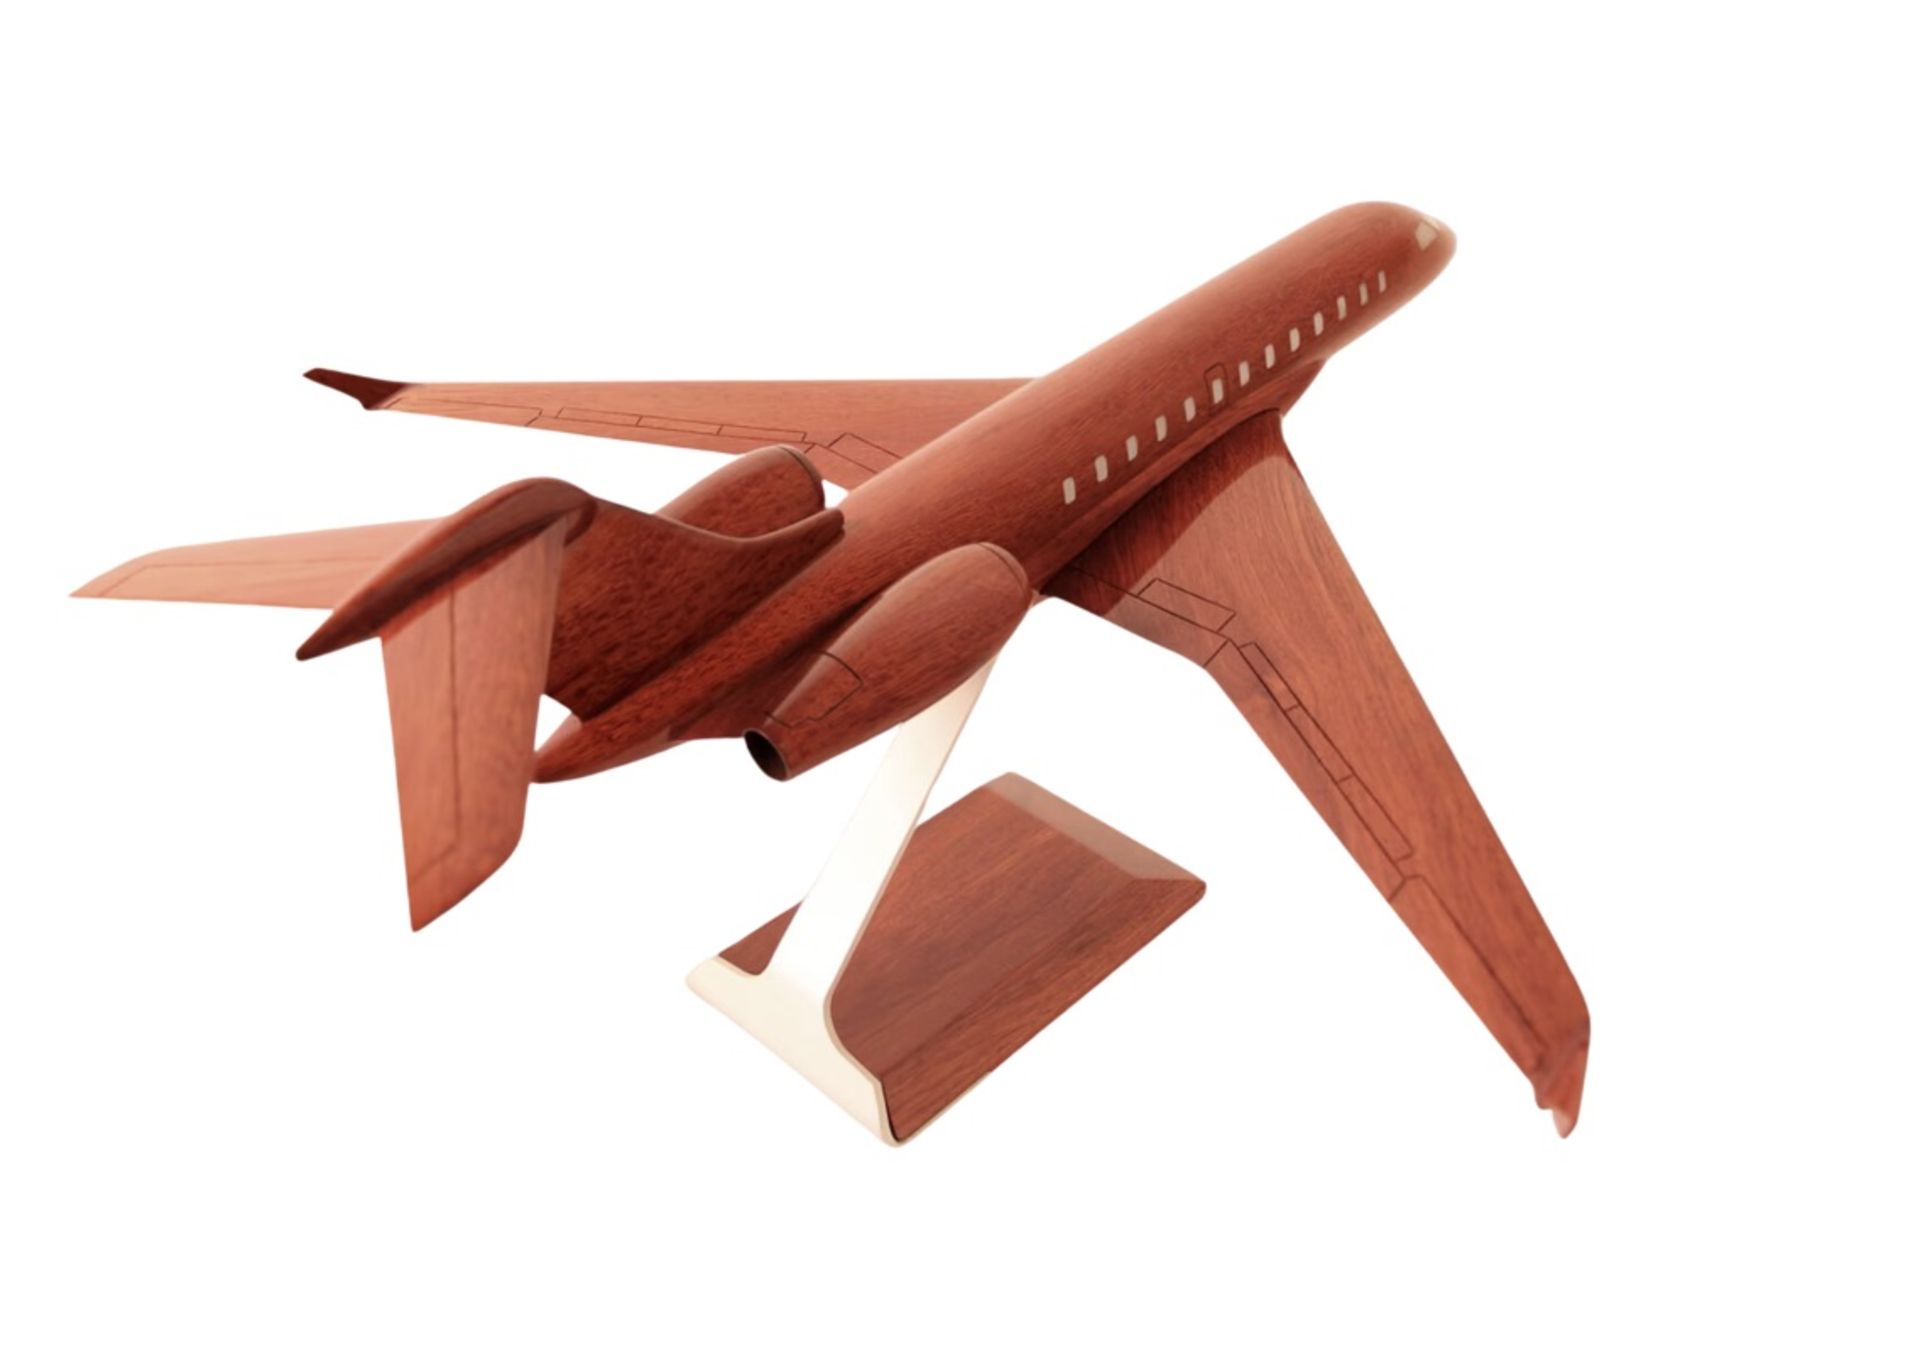 Bombardier Global 8500 Wooden Scale Display Model - Image 4 of 7